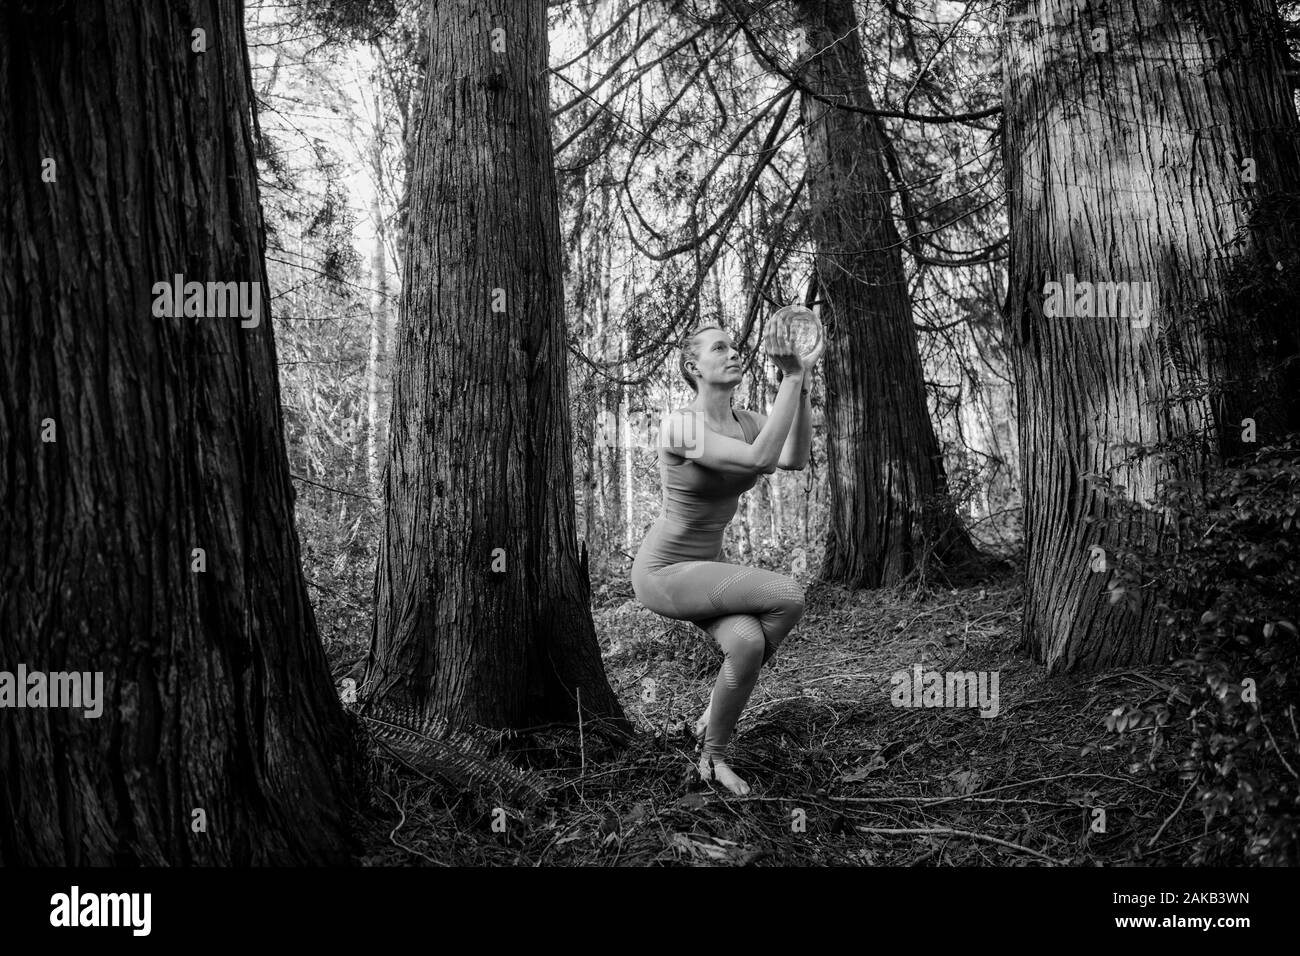 View of young woman in yoga pose in forest Banque D'Images